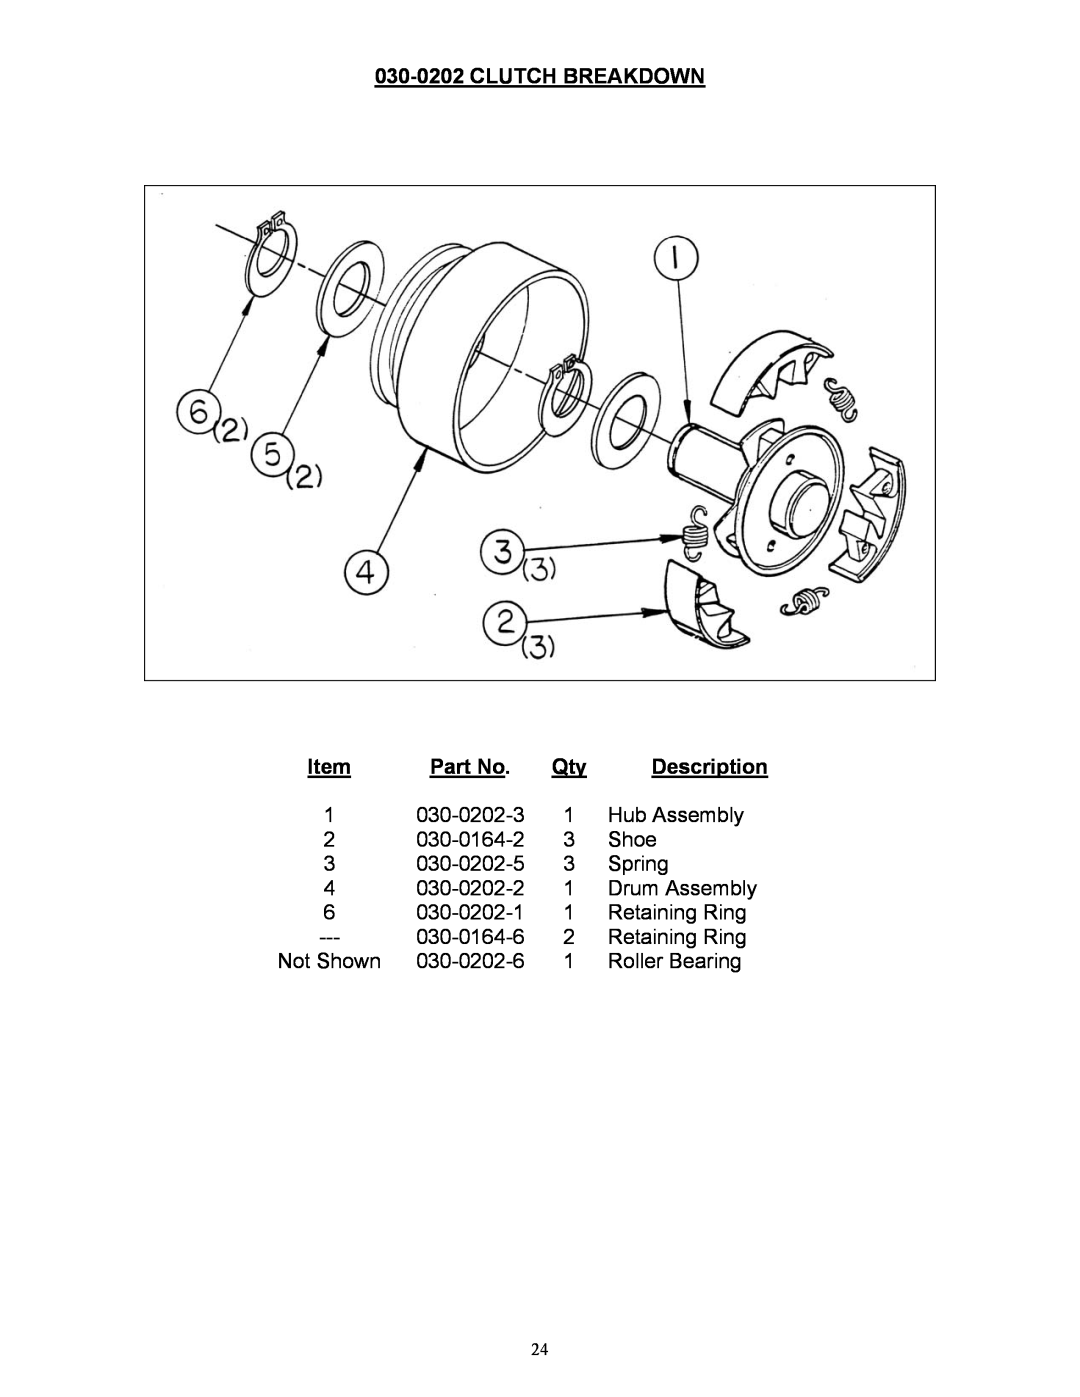 Country Home Products C123E-CHP instruction manual 030-0202CLUTCH BREAKDOWN, Item, Part No, Description 